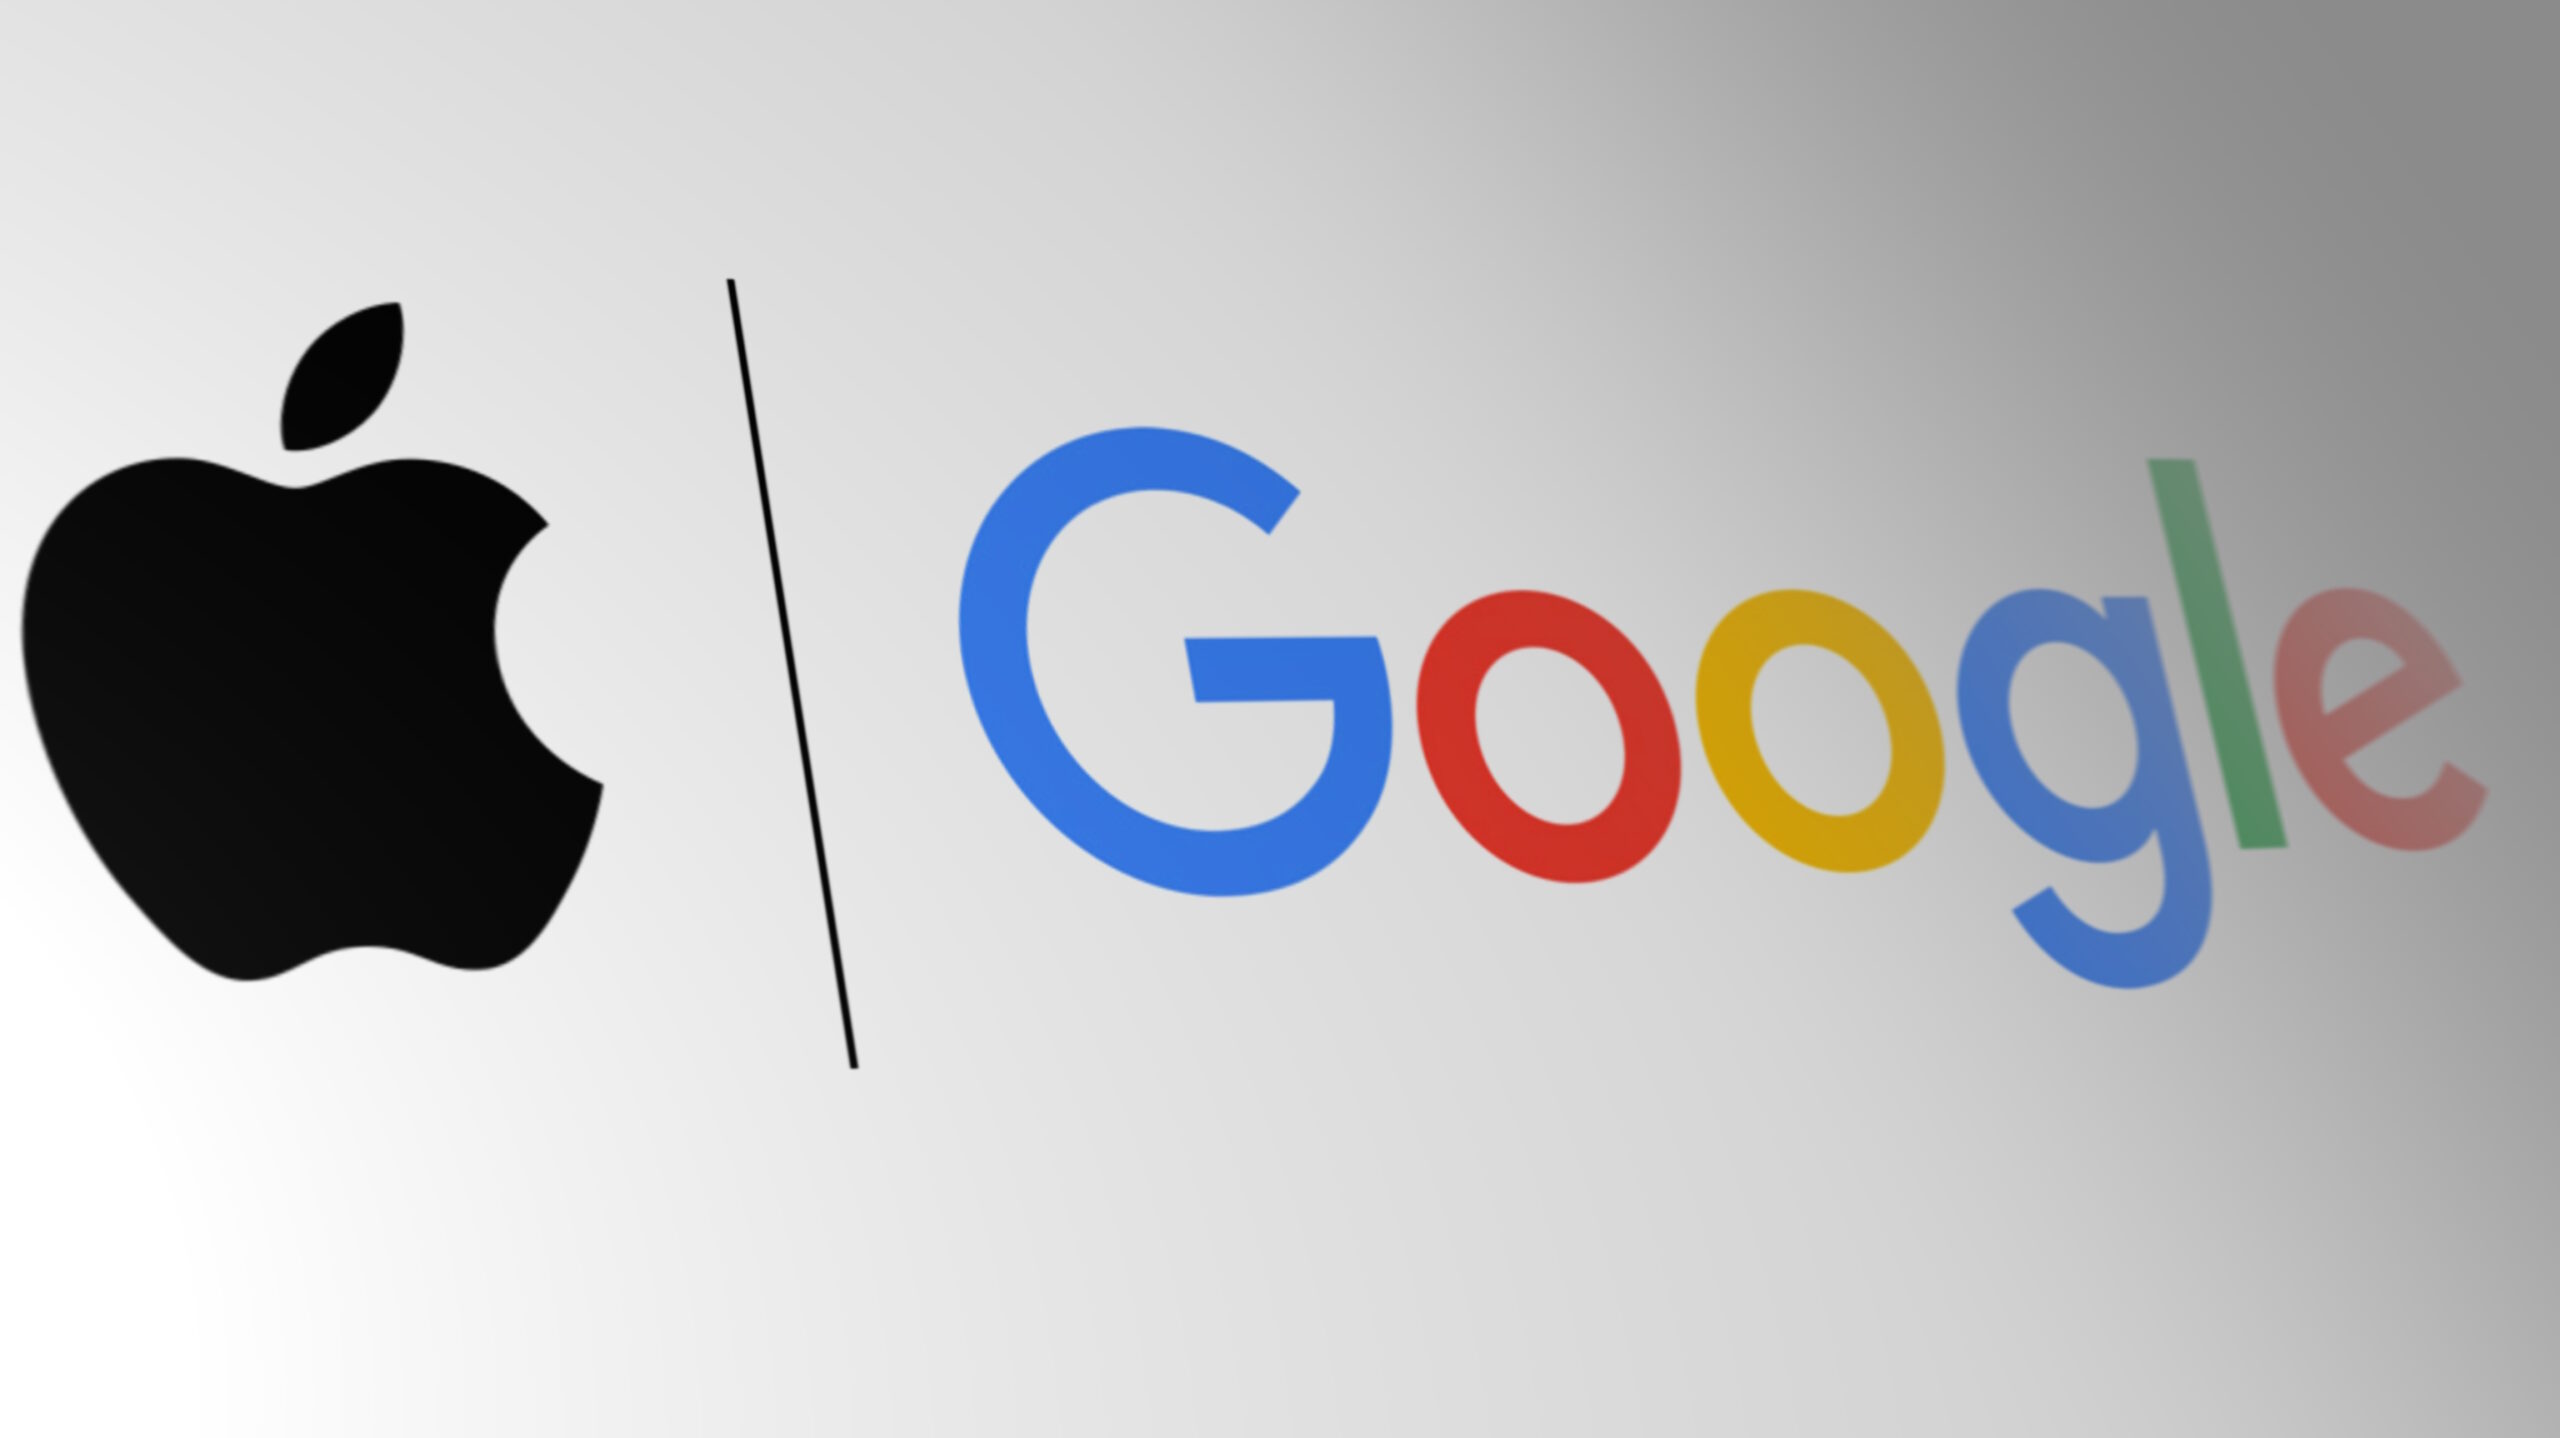 Apple and Google in amazing collaboration